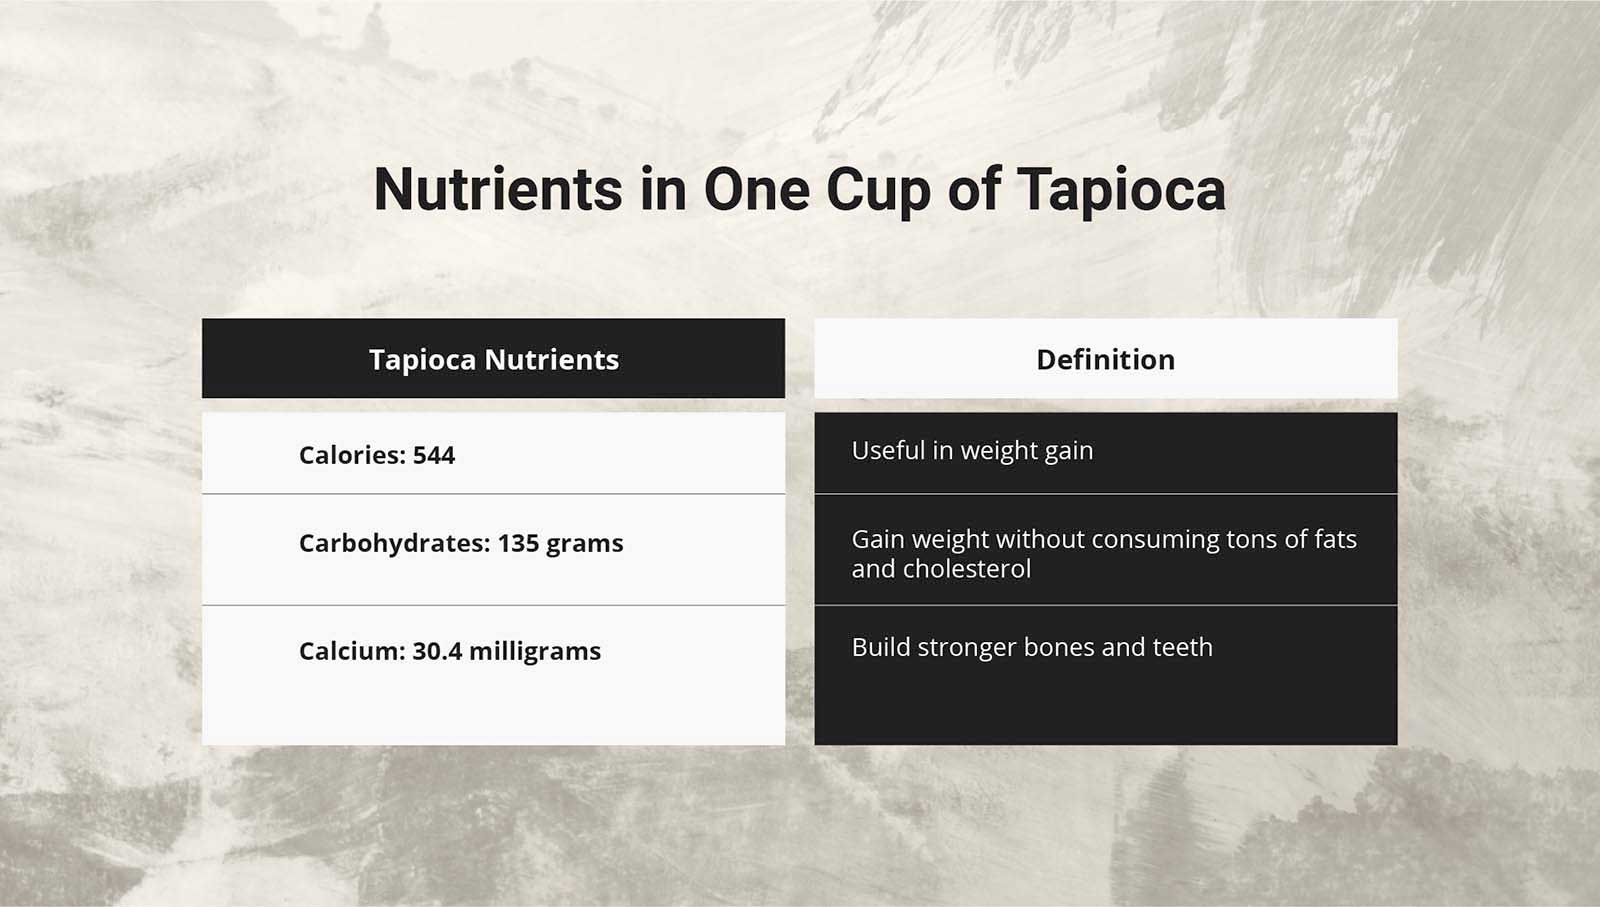 Table 2: Nutrients in One Cup of Tapioca